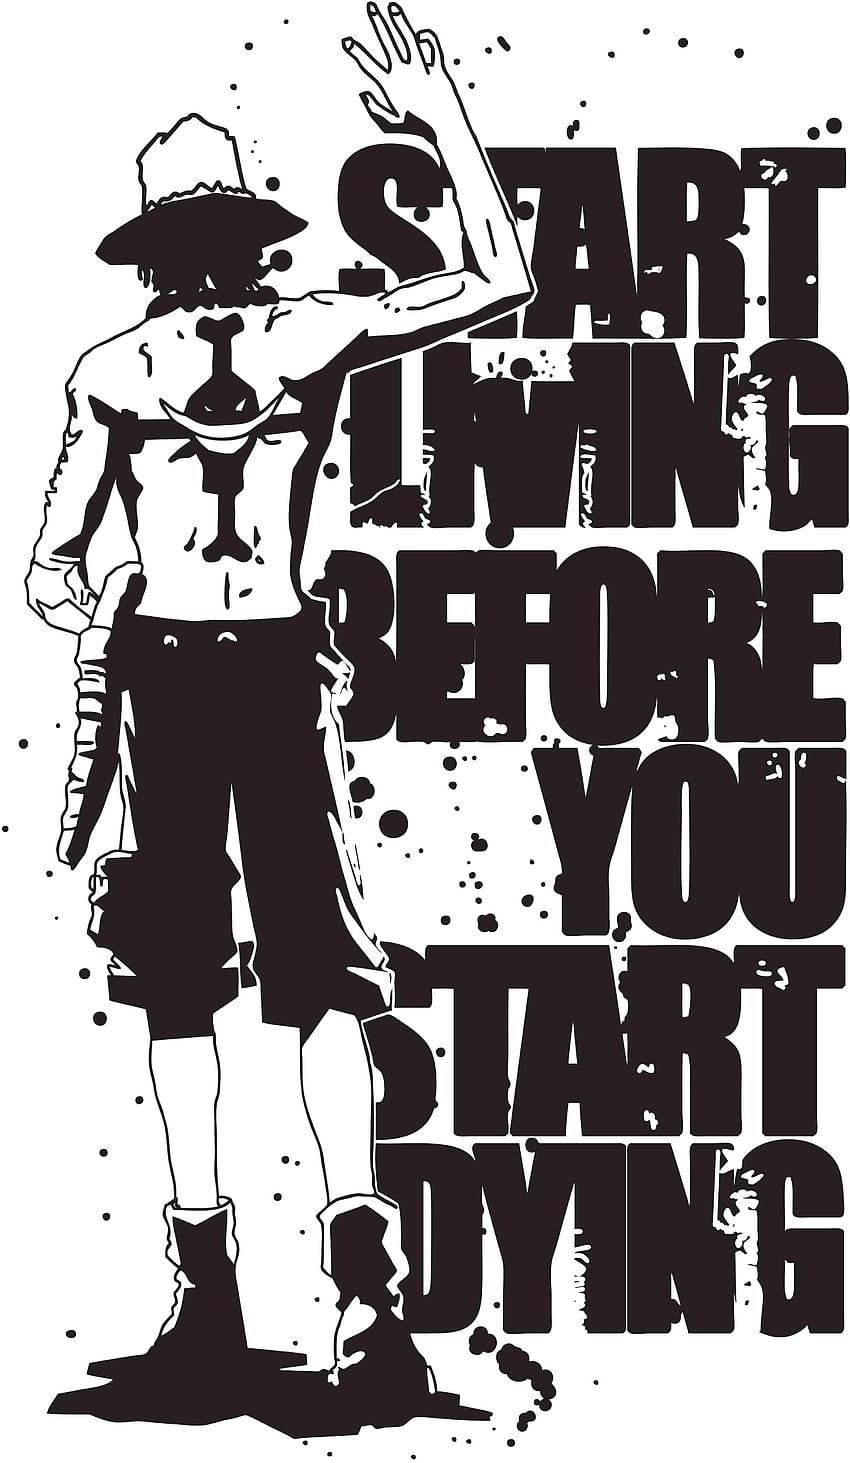 One Piece  Wallpaper Black and White by NMHps3 on DeviantArt  Black and white  one piece One piece quotes One piece wallpaper iphone